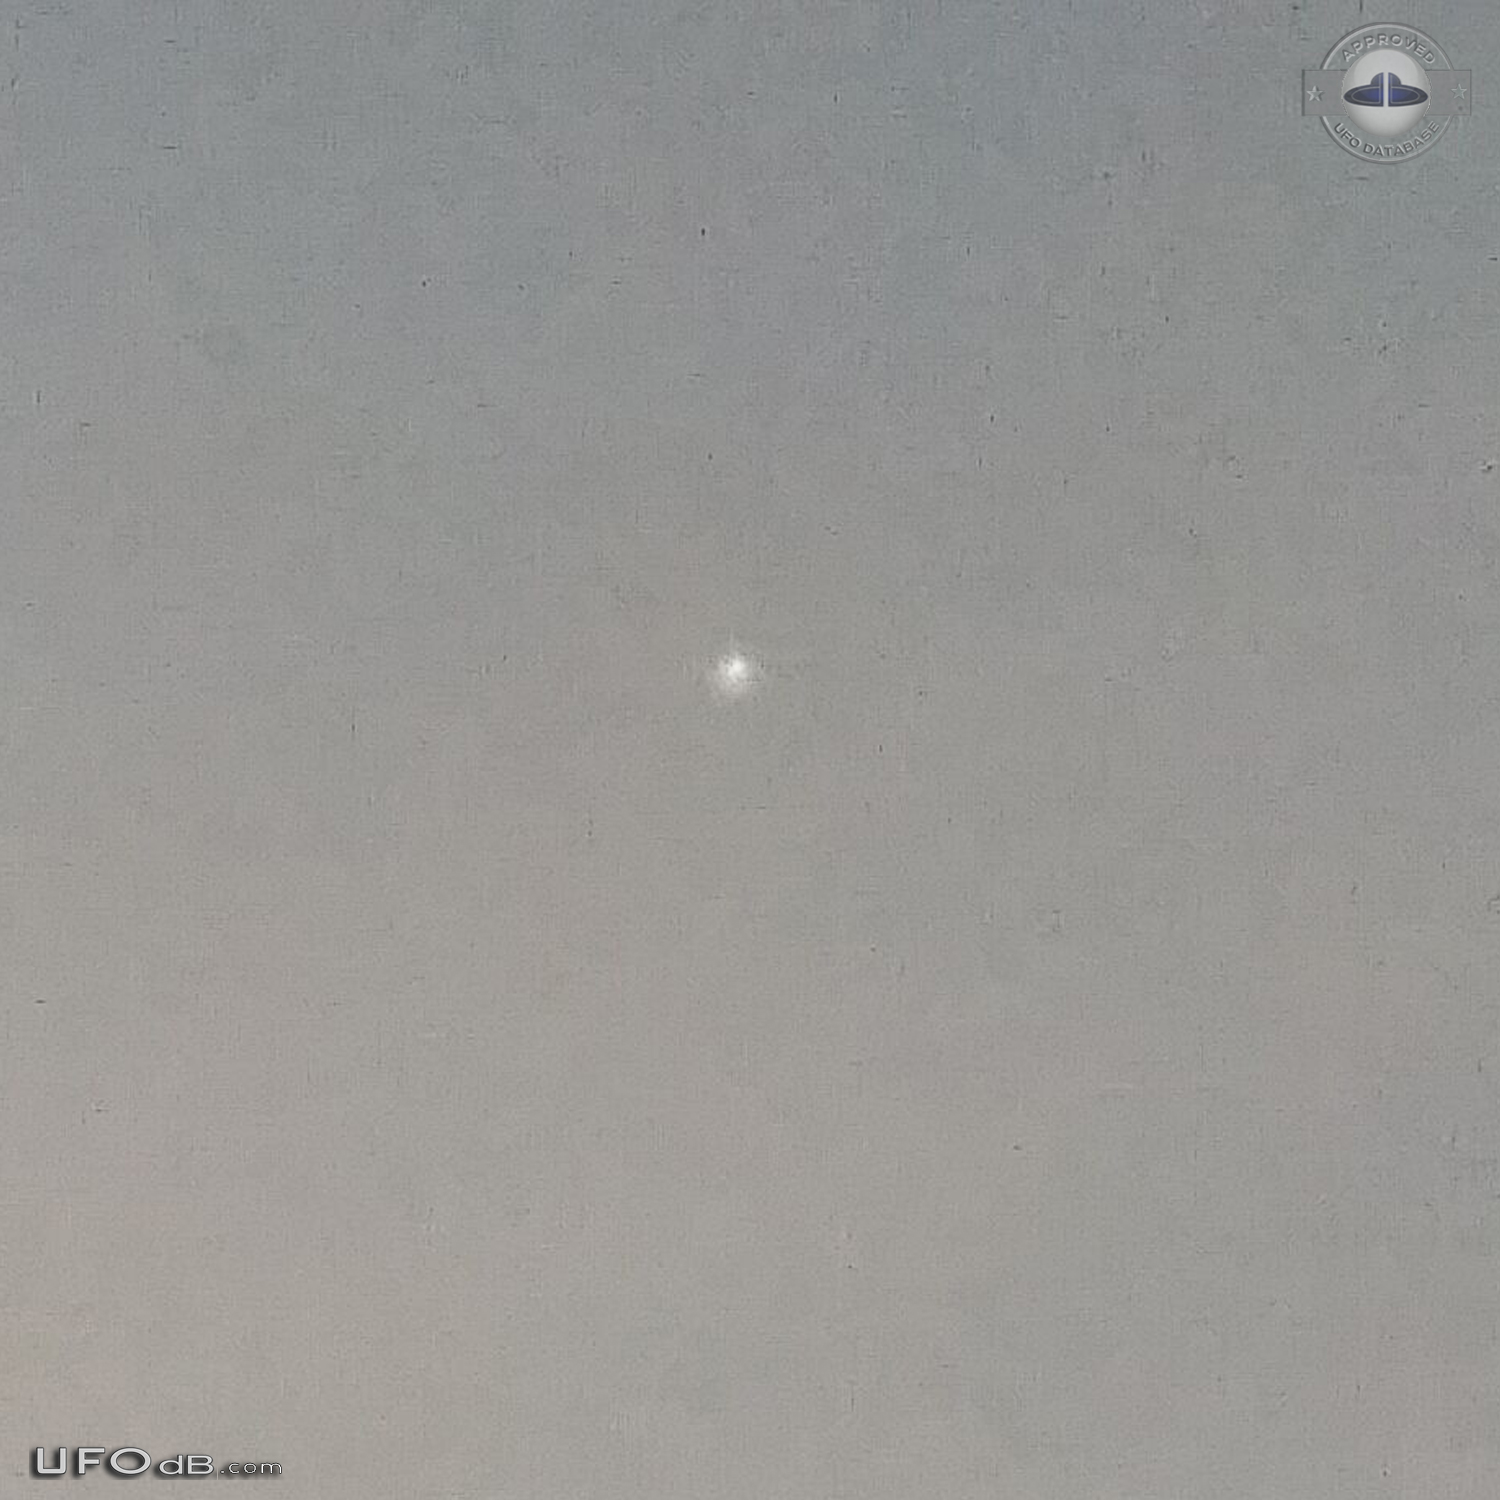 Star like ufo keeps hovering at one spot - Rotterdam Netherlands 2015 UFO Picture #726-3